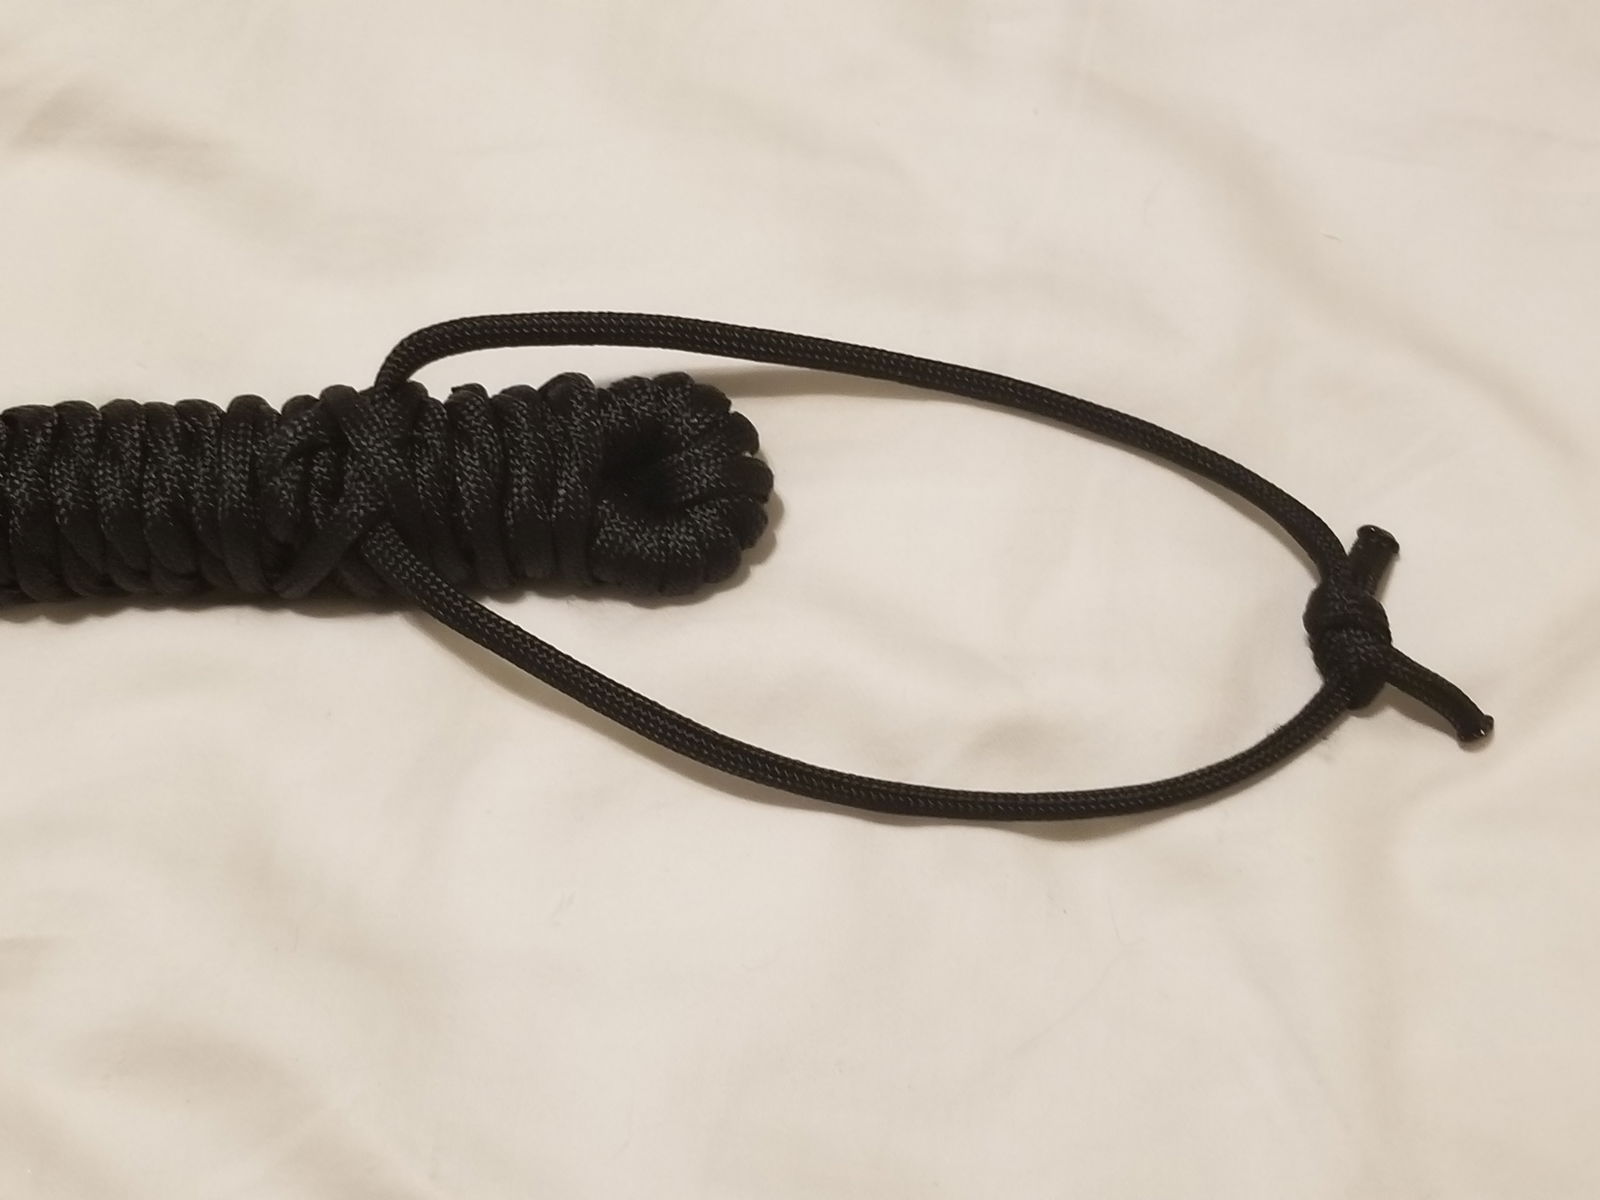 Photo by LemonadeStands with the username @LemonadeStands,  December 18, 2018 at 2:29 AM. The post is about the topic DIY and the text says 'Here's a paracord flogger I made as a Christmas gift for a friend!'